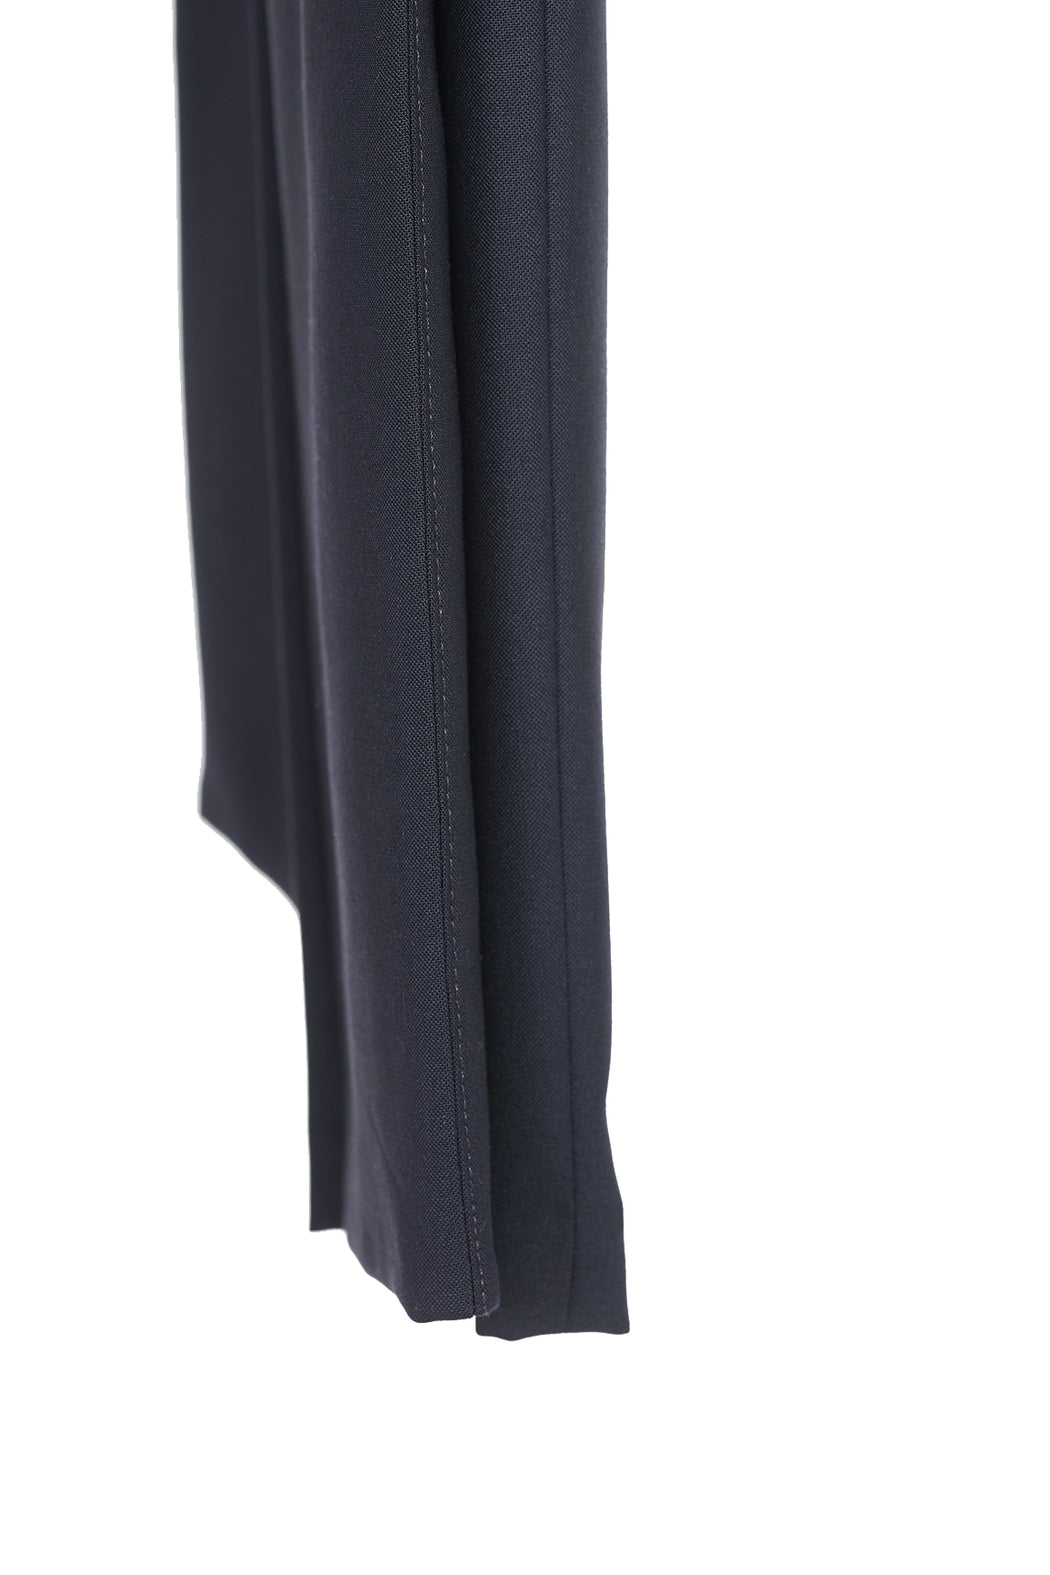 Front Panel Trousers - Dark Navy